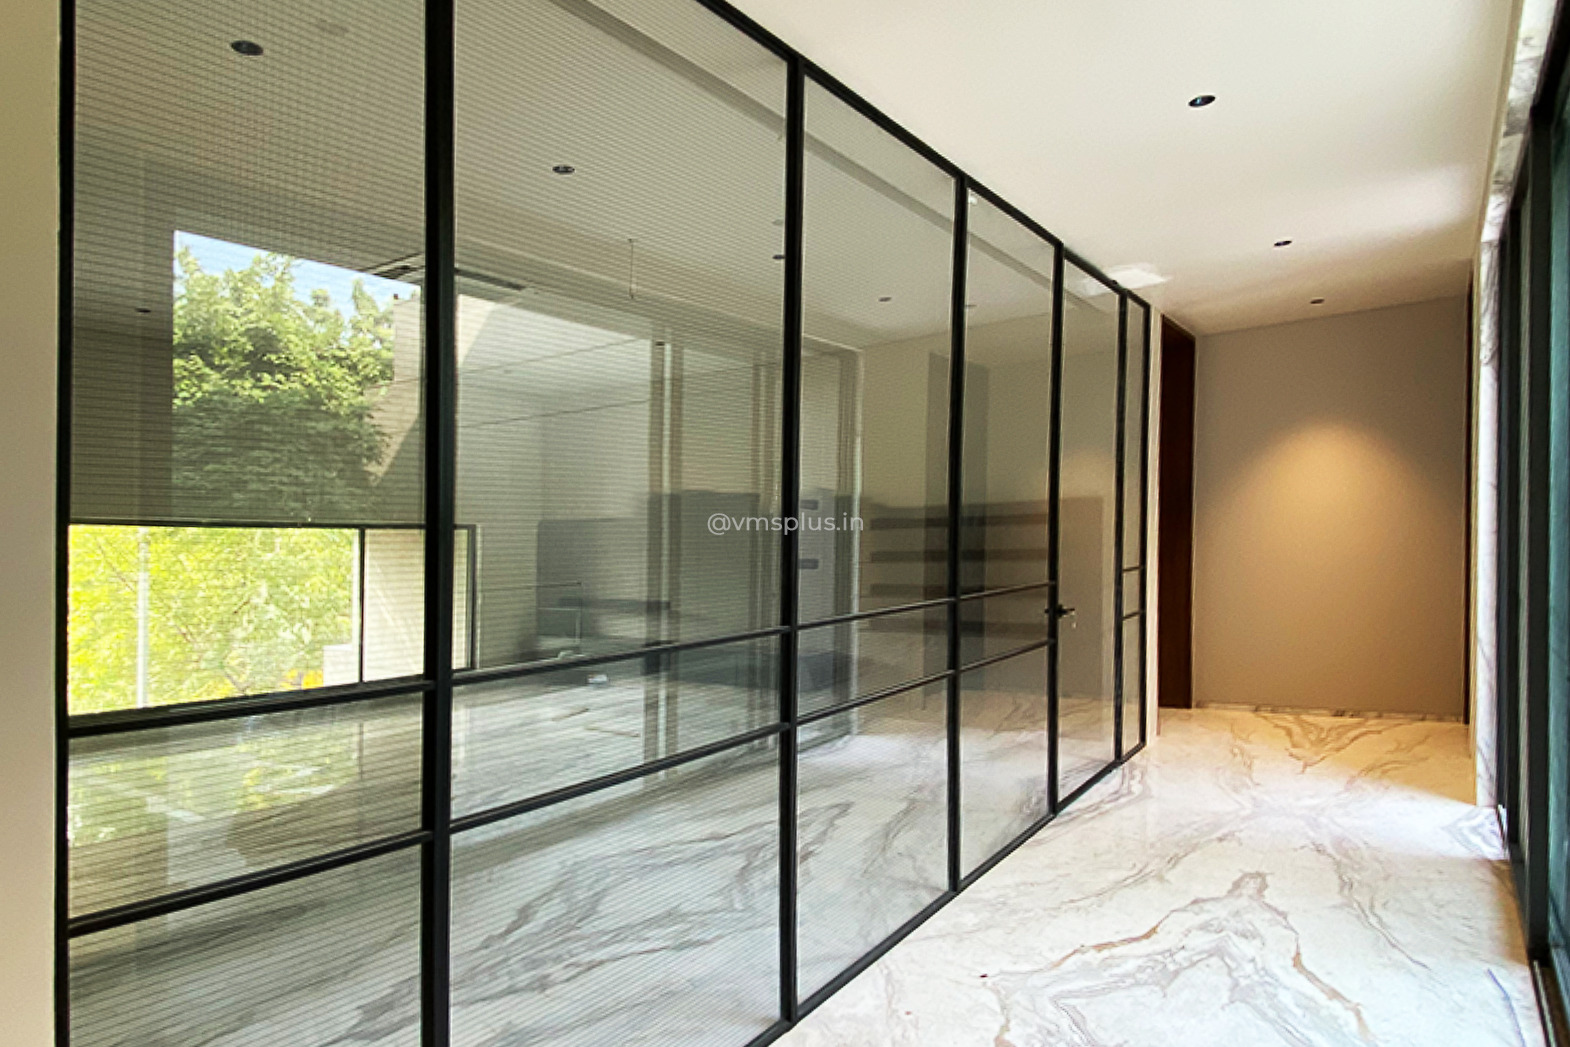 The Design of Opening Glass Walls For The Home